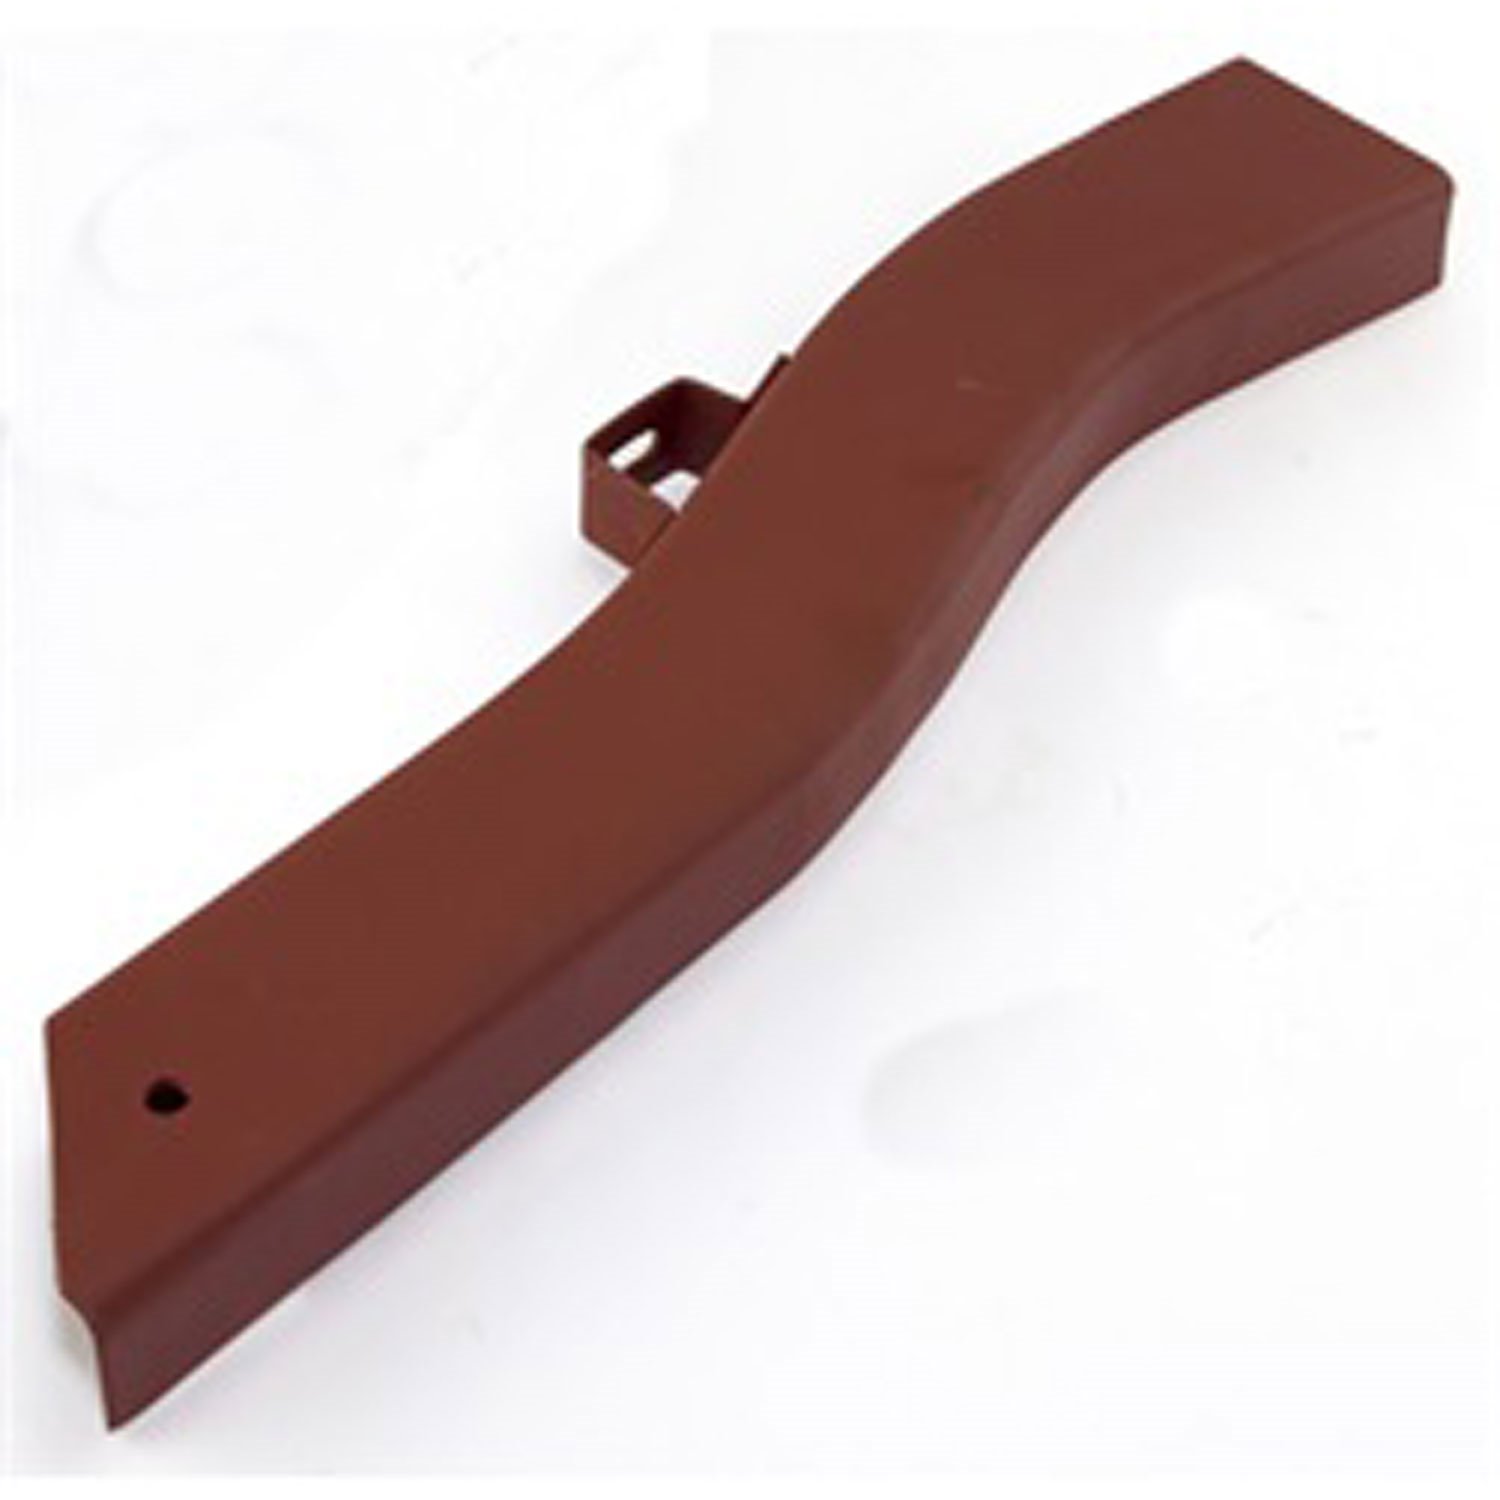 This reproduction front frame rail section from Omix-ADA is 18.5 inches long and fits the left side of 41-45 Willys MB.